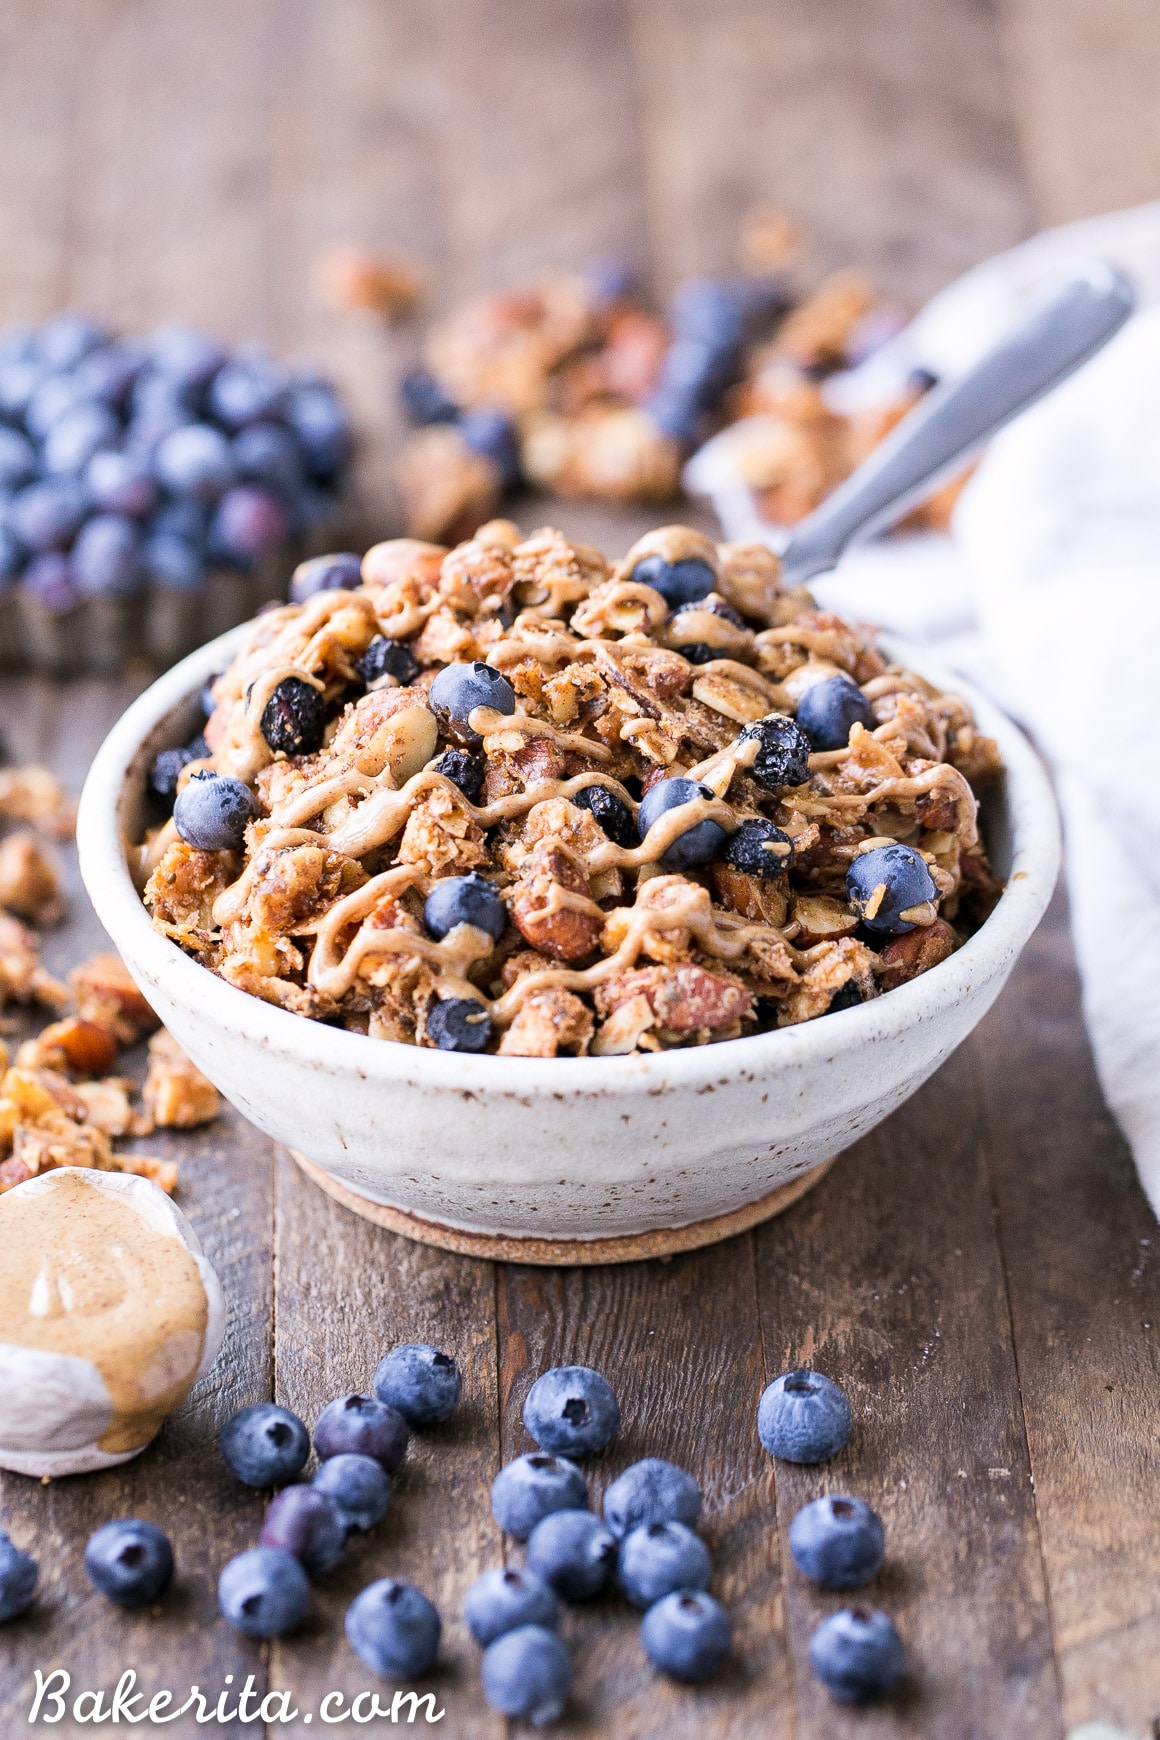 This Blueberry Almond Butter Grain-Free Granola is an easy and satisfying gluten-free, vegan and paleo granola recipe that makes the perfect breakfast or snack. It's made with simple, wholesome ingredients and is loaded with filling nuts and healthy fats to keep you satisfied.